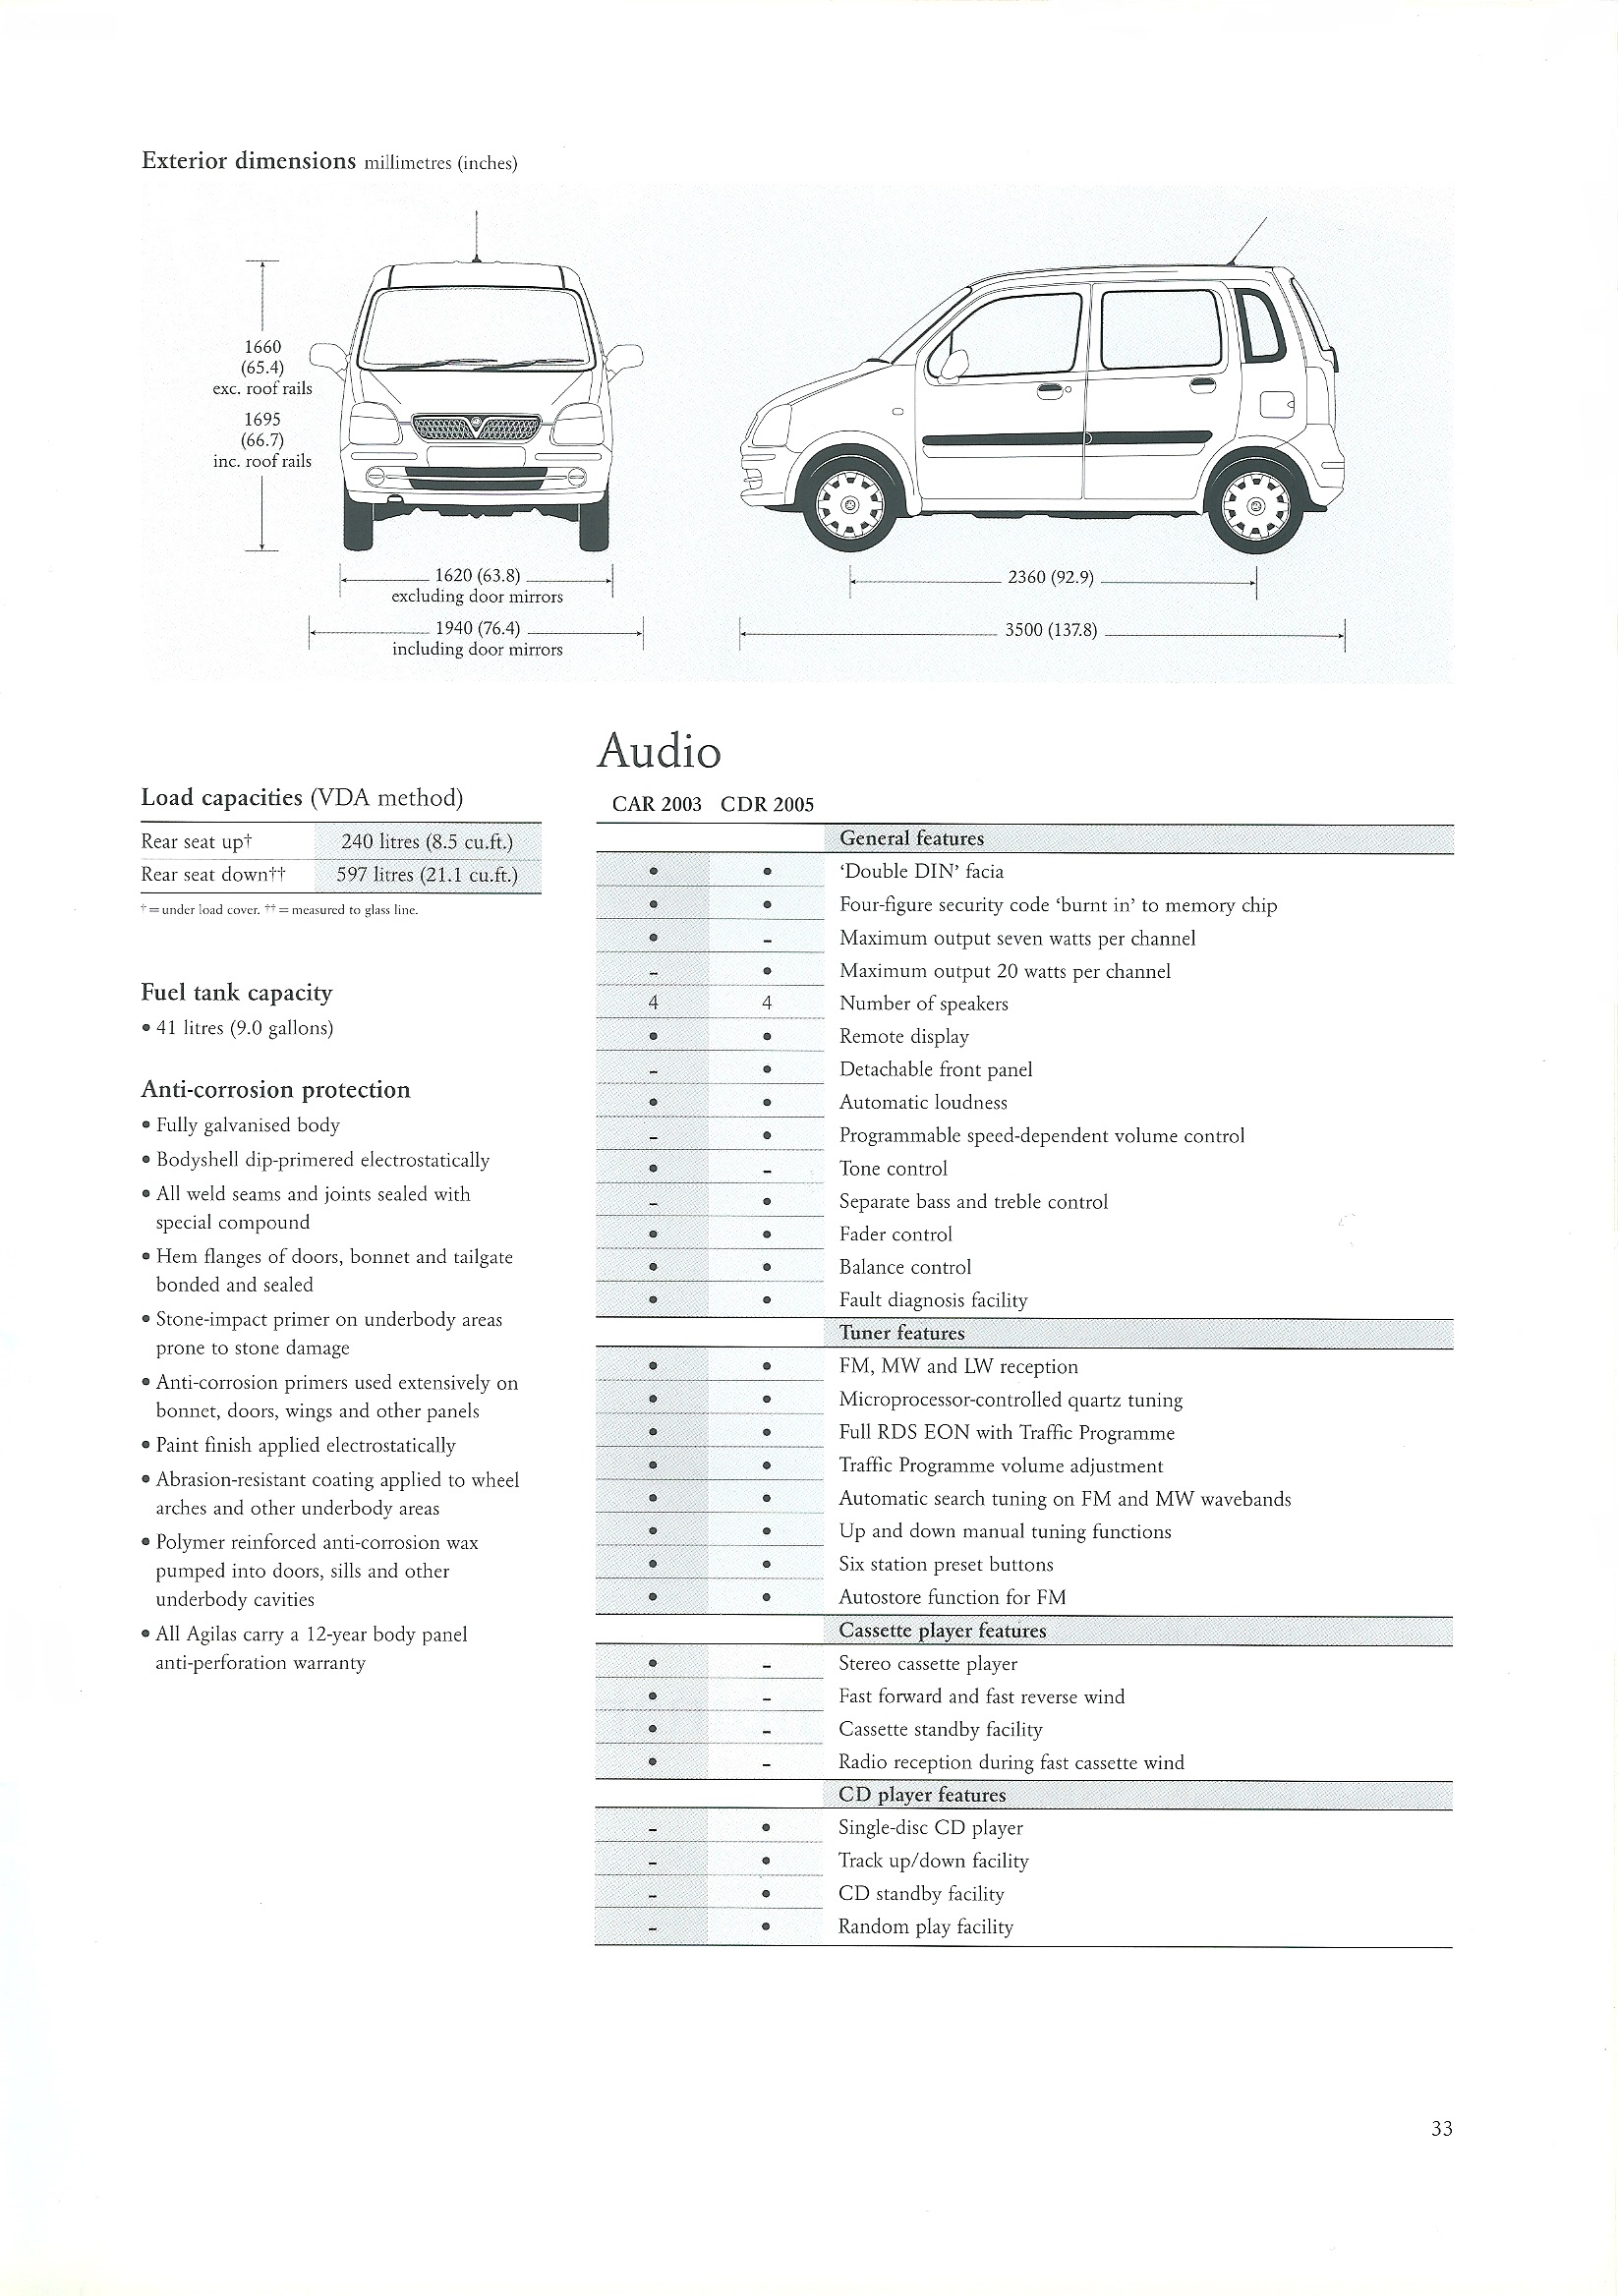 Vauxhall H00 - Agila A confidential dealer product information guide